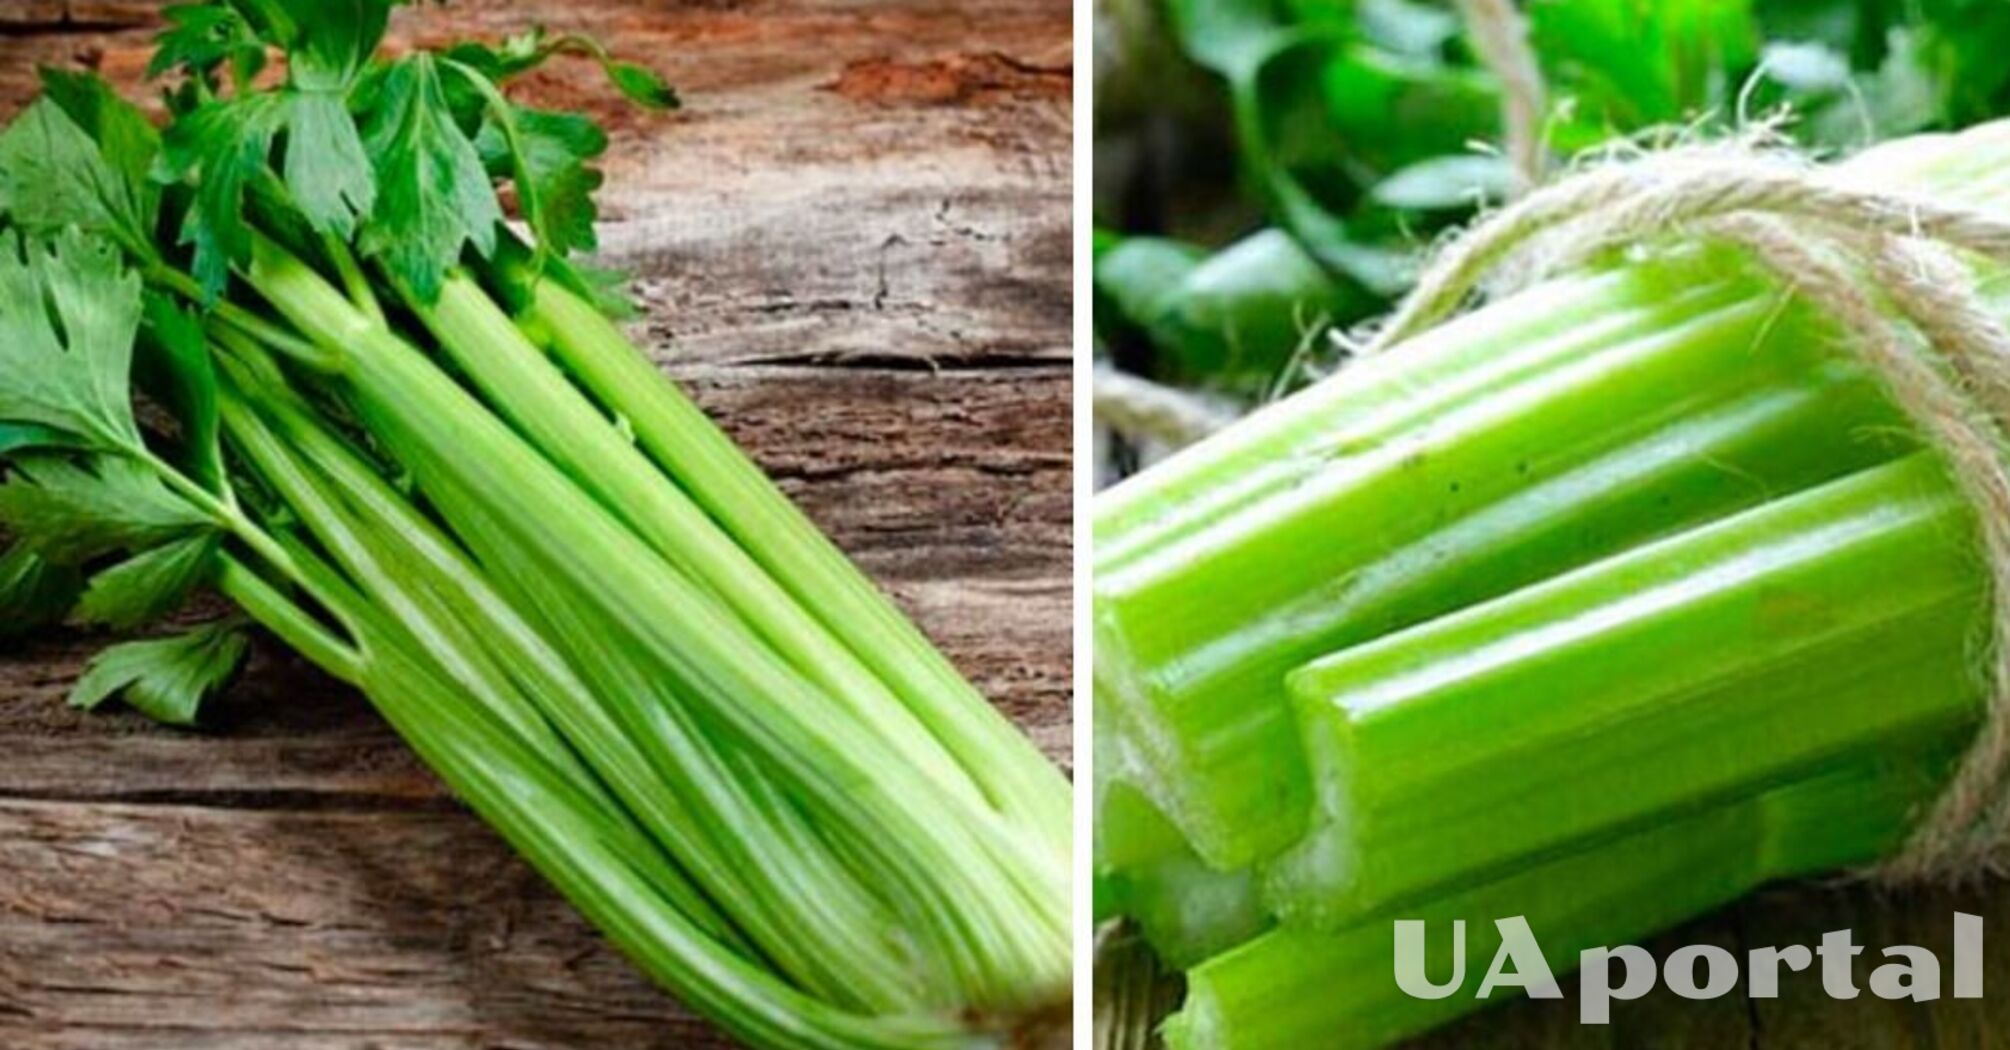 Strengthens the immunity and calms the nervous system: what vegetable should be eaten every day